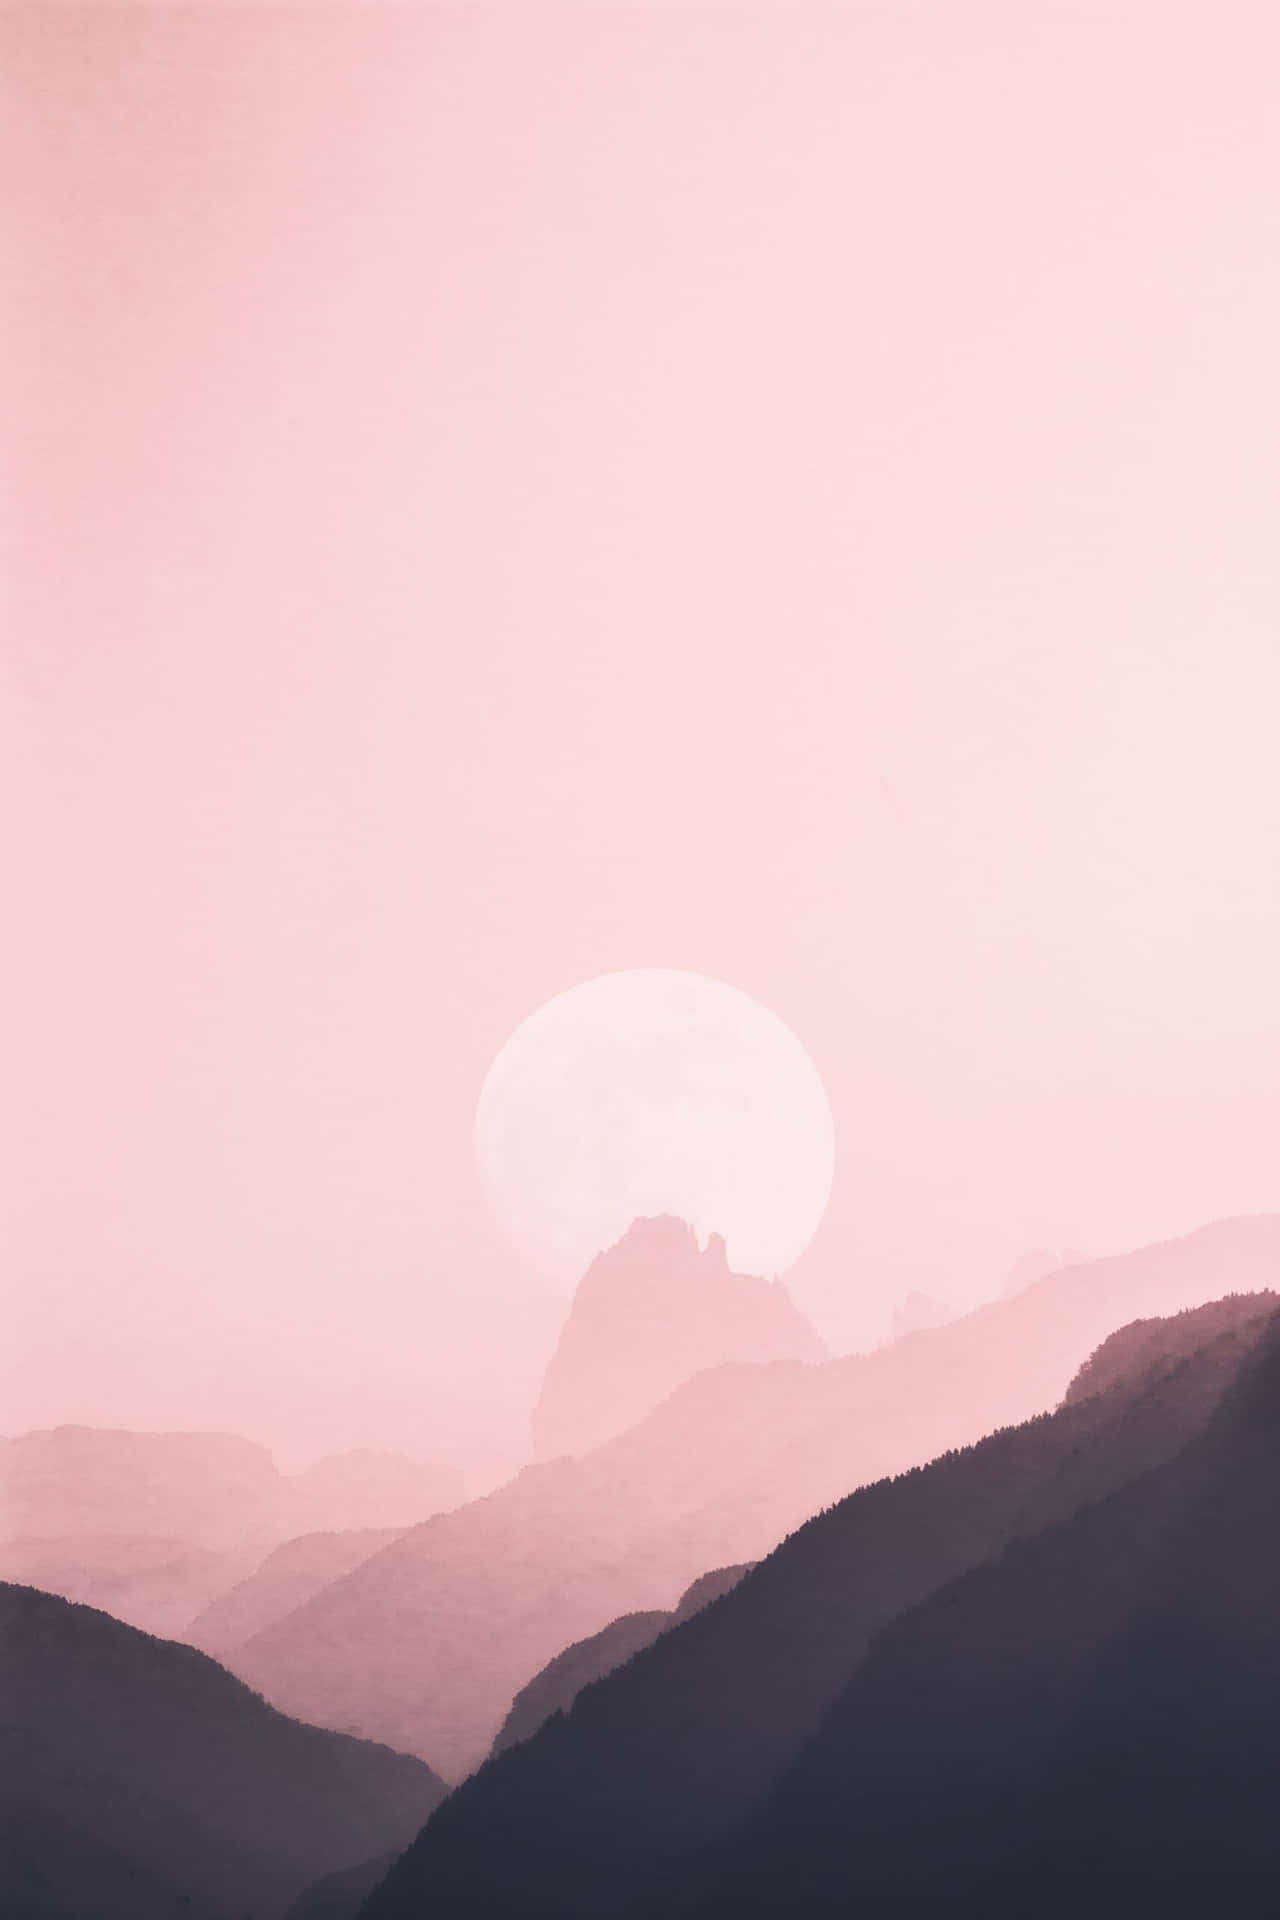 Rising Above the Clouds - A Pink Moon Wallpaper